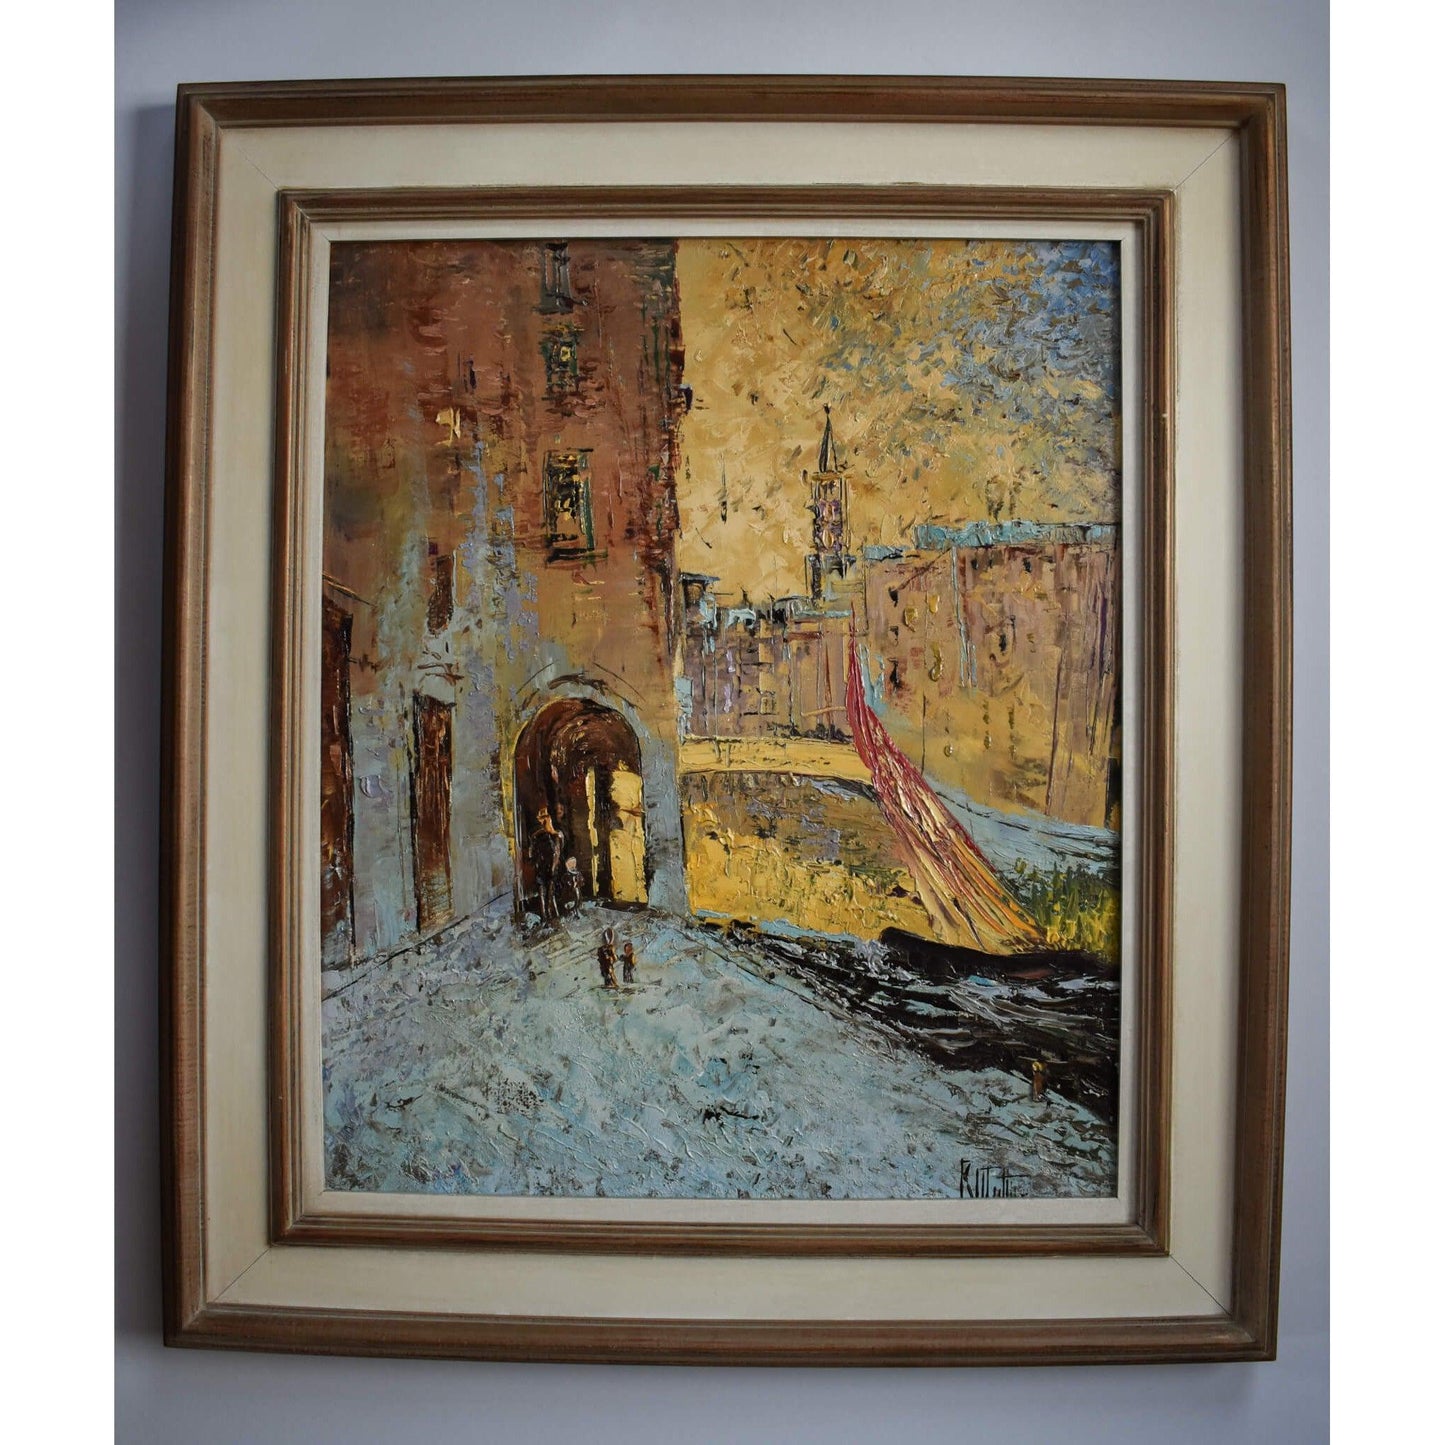 Vintage landscape oil painting, Venice view original 1973, by Otto Rut, for sale at Winckelmann Gallery